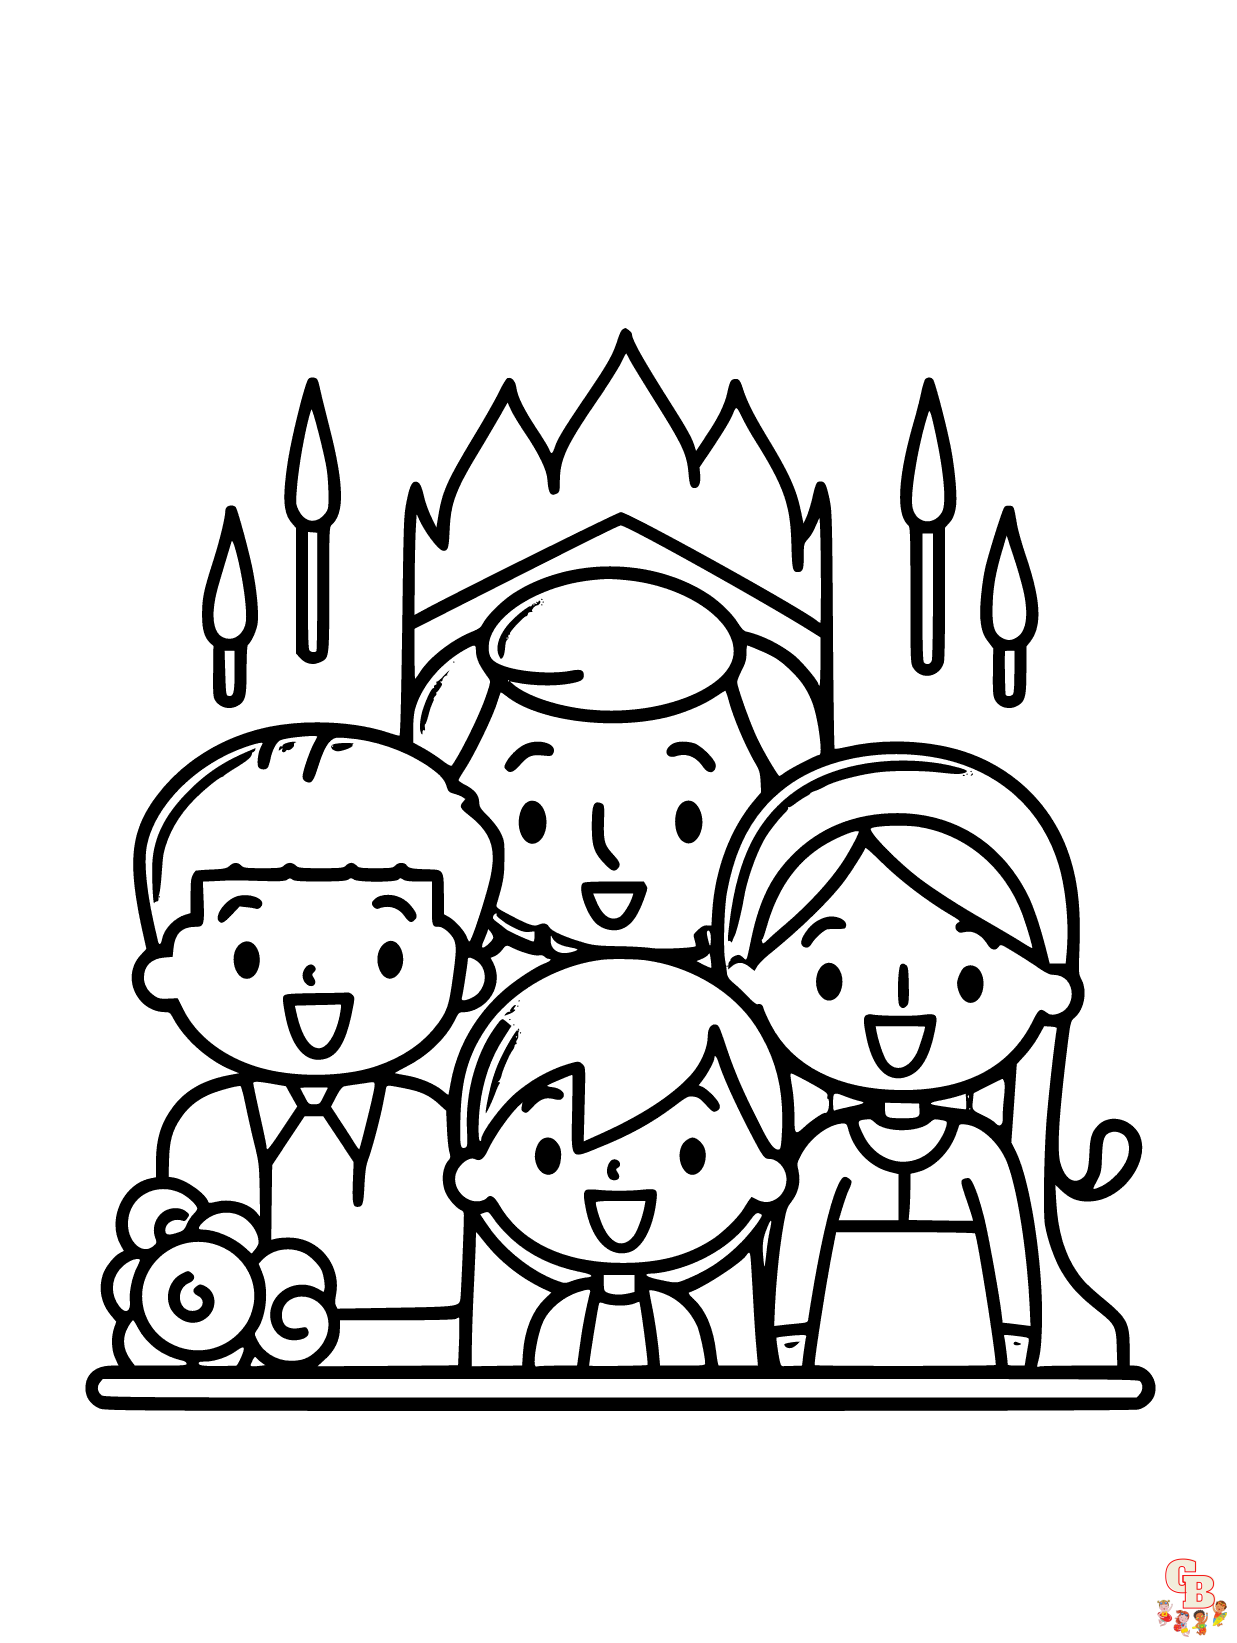 Shavuot coloring pages free